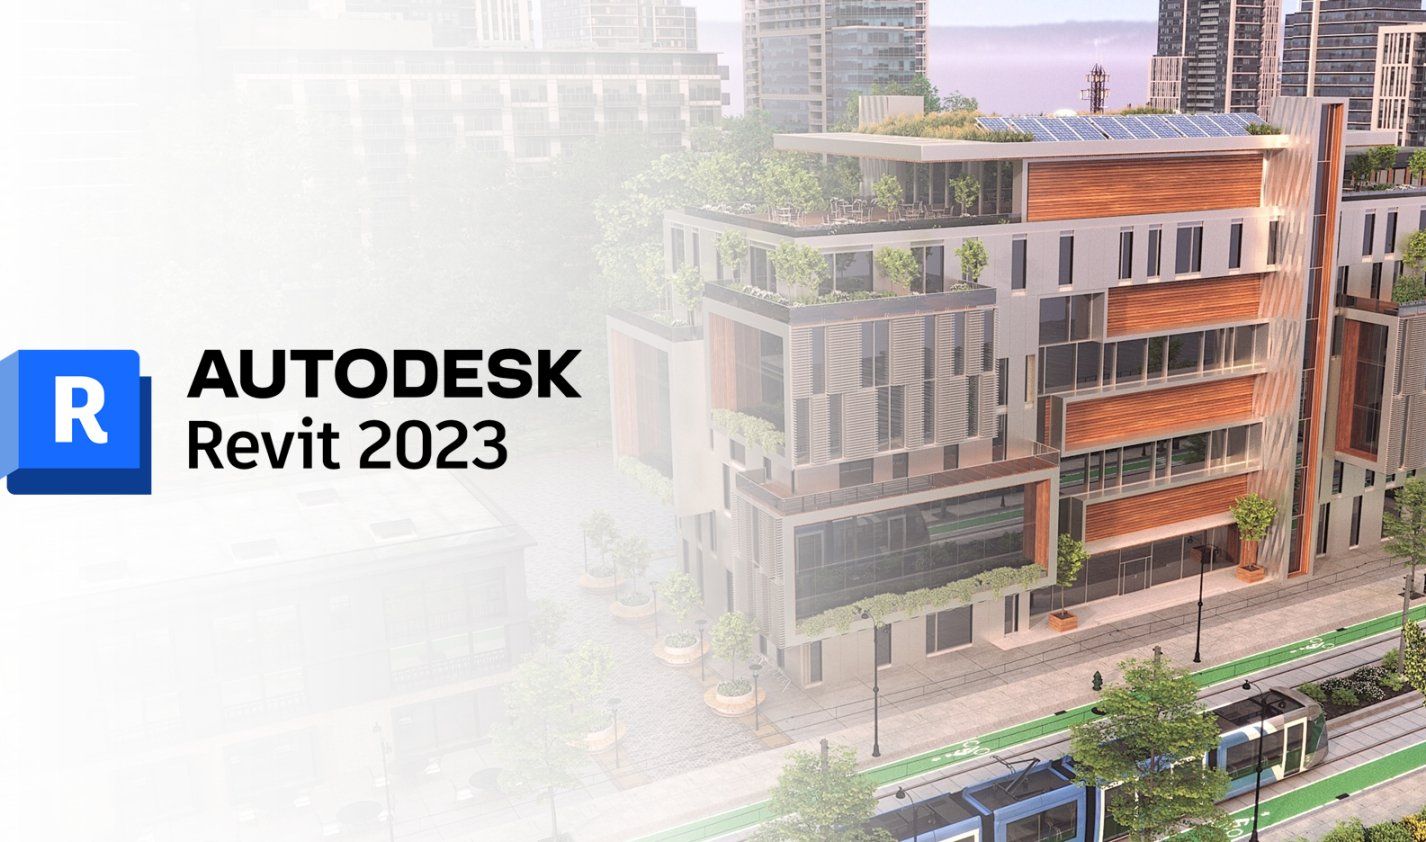 Architectural visualisation of a revit model with Autodesk Revit 2023 written on the left